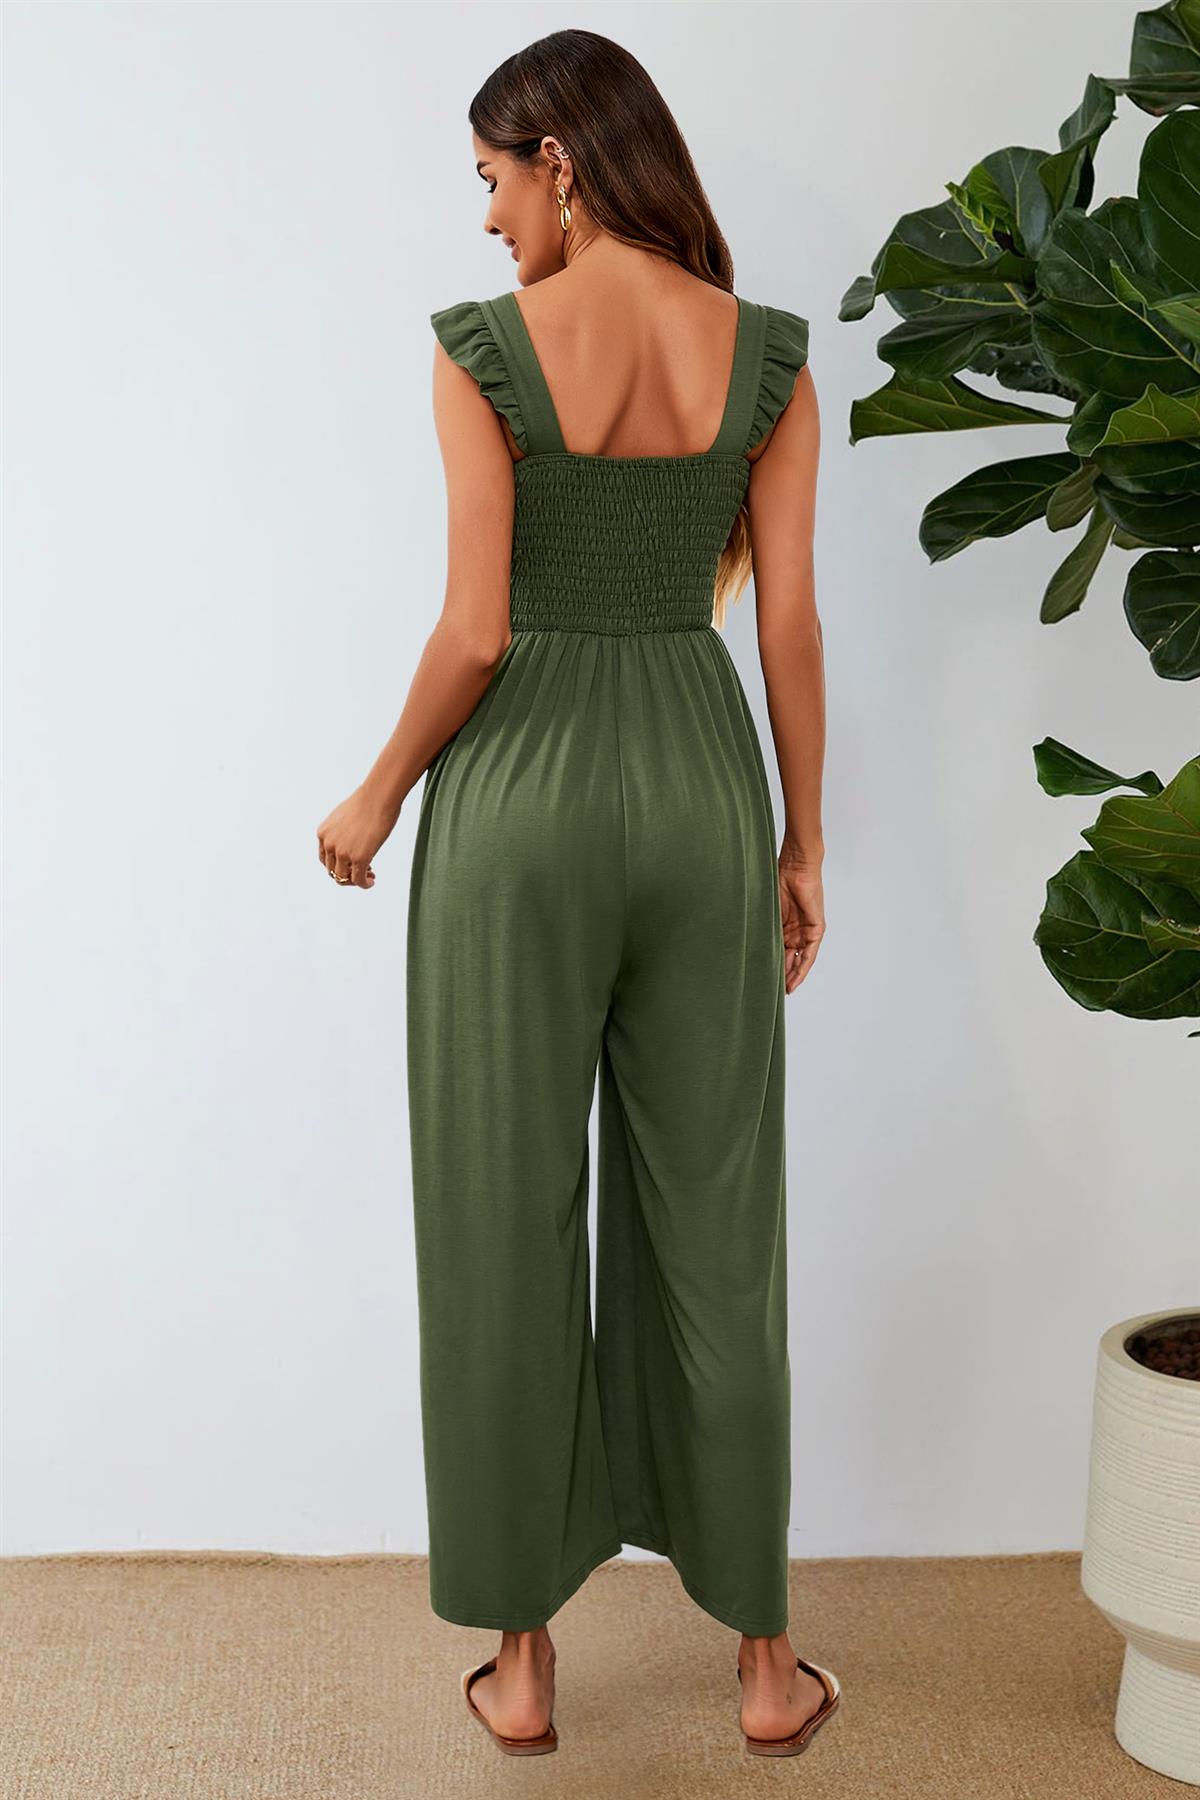 Frill Detail Strappy Jumpsuit In Olive FS579-Olive